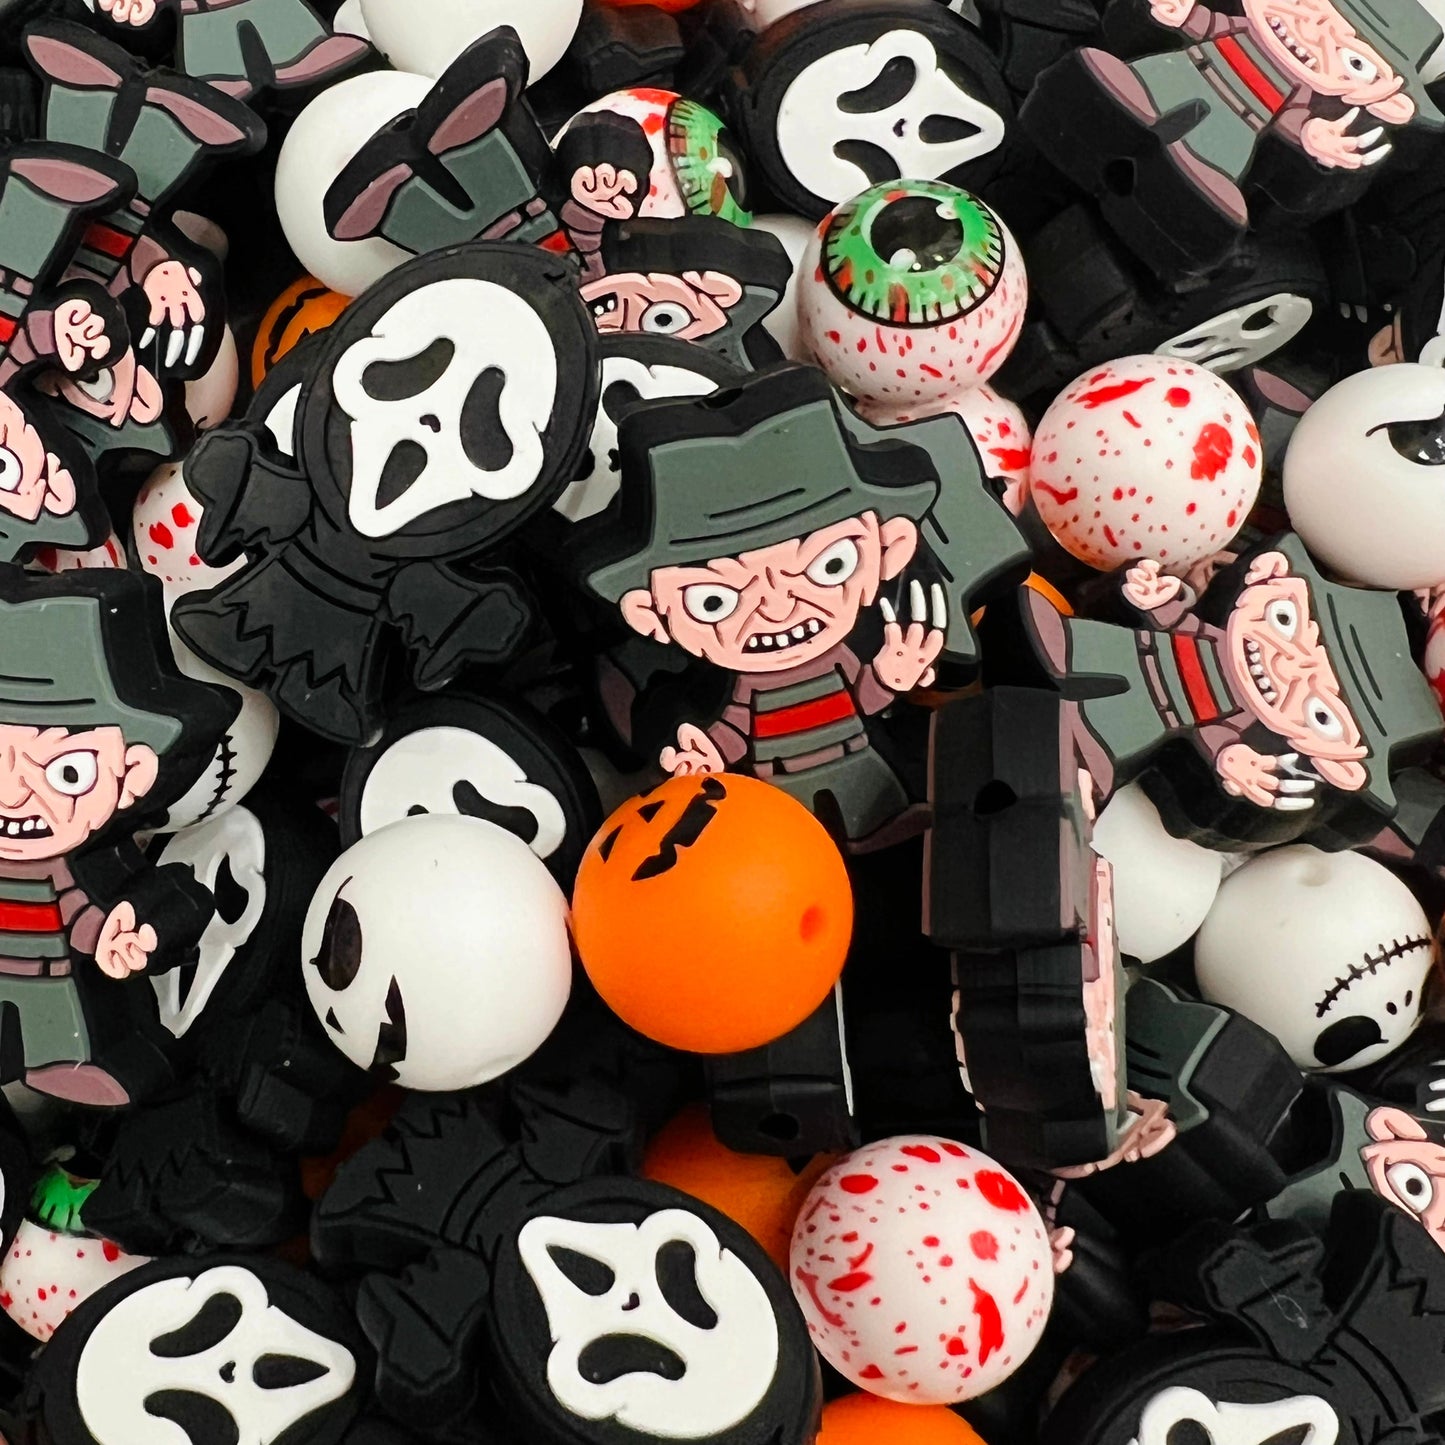 【Focal Beads】Nightmare before Christmas 2.0 UPGRADED VERSION/ Good for Pen Design Halloween Theme